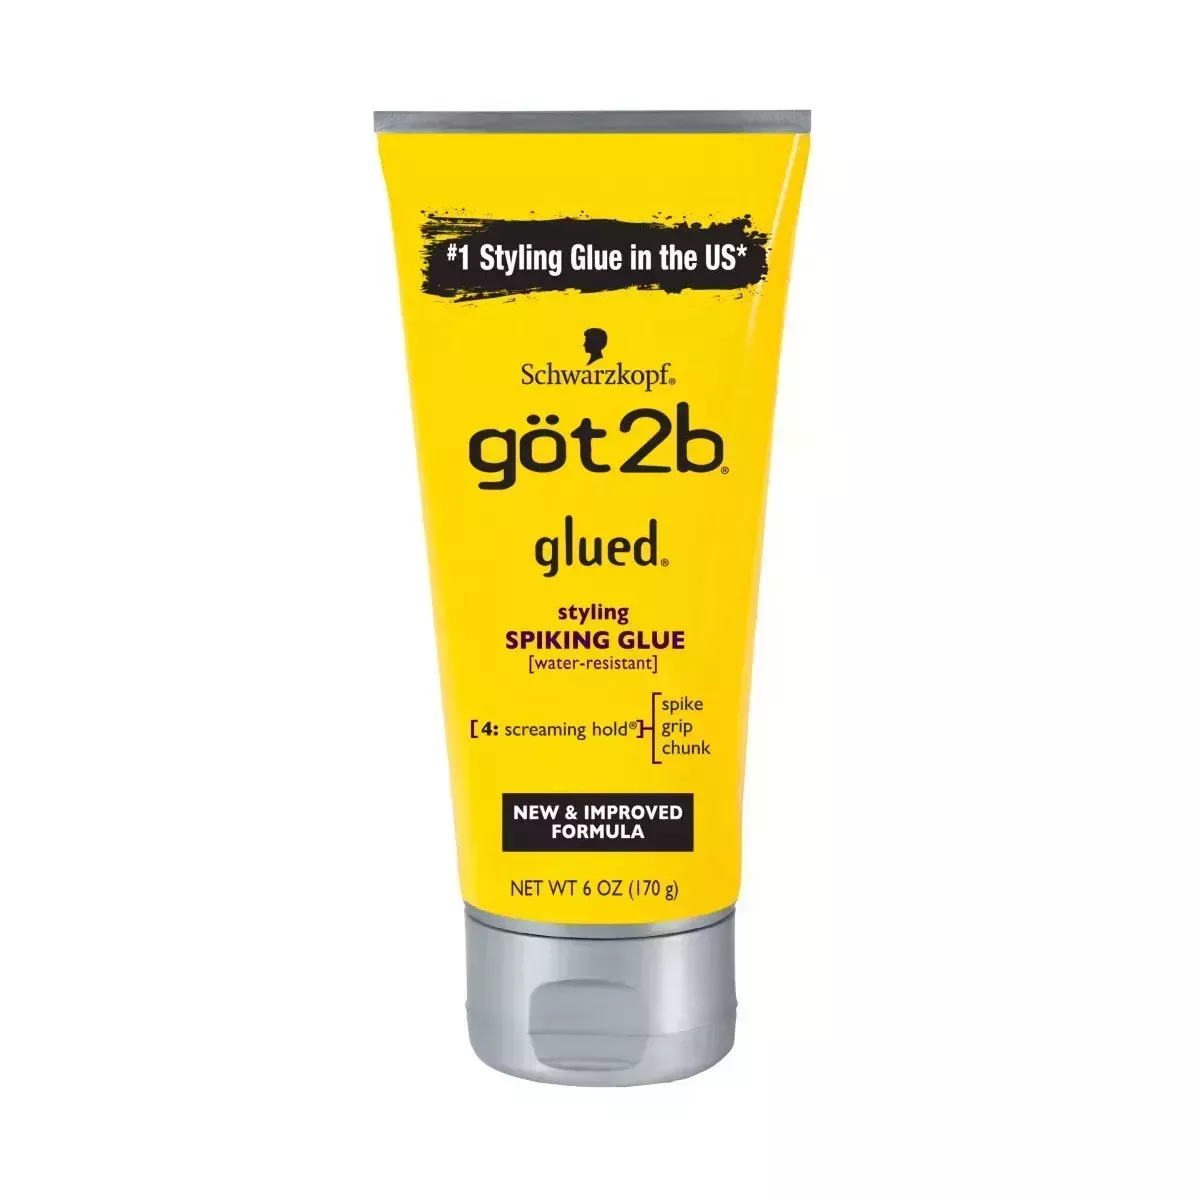 A yellow tube of styling gel with a silver cap and black lettering on a white background